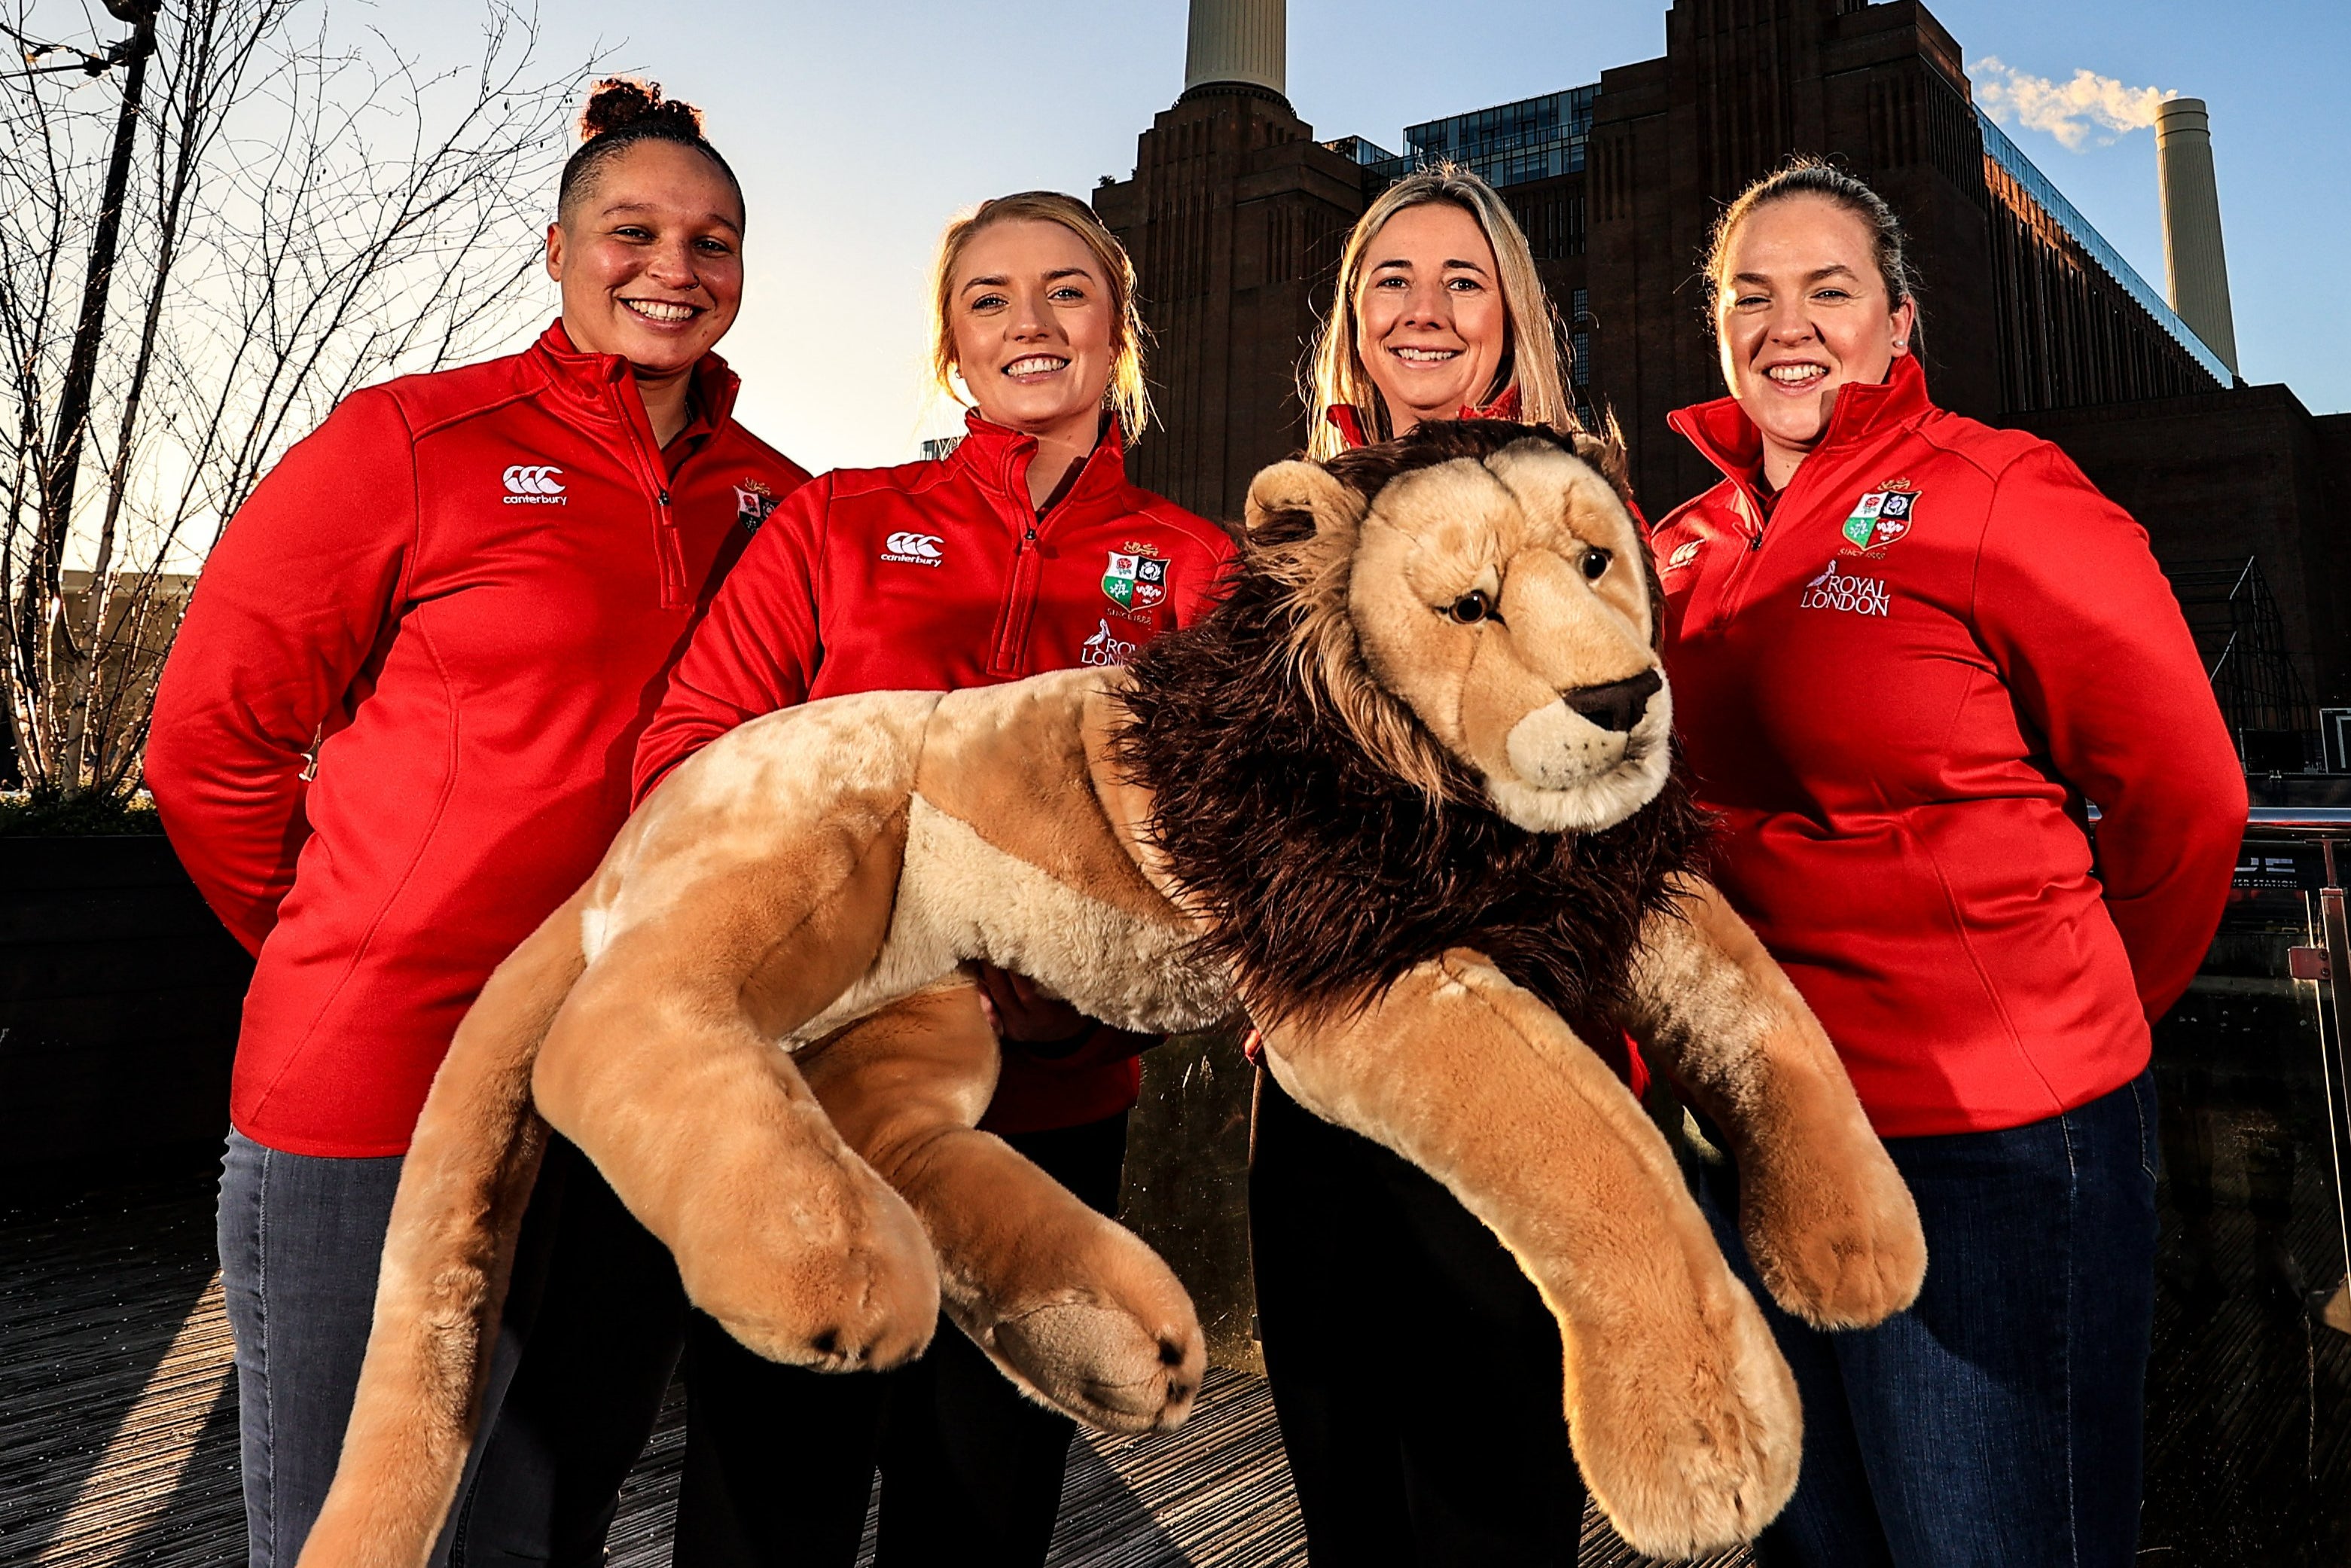 The first ever British and Irish Lions women’s team will be formed in 2027